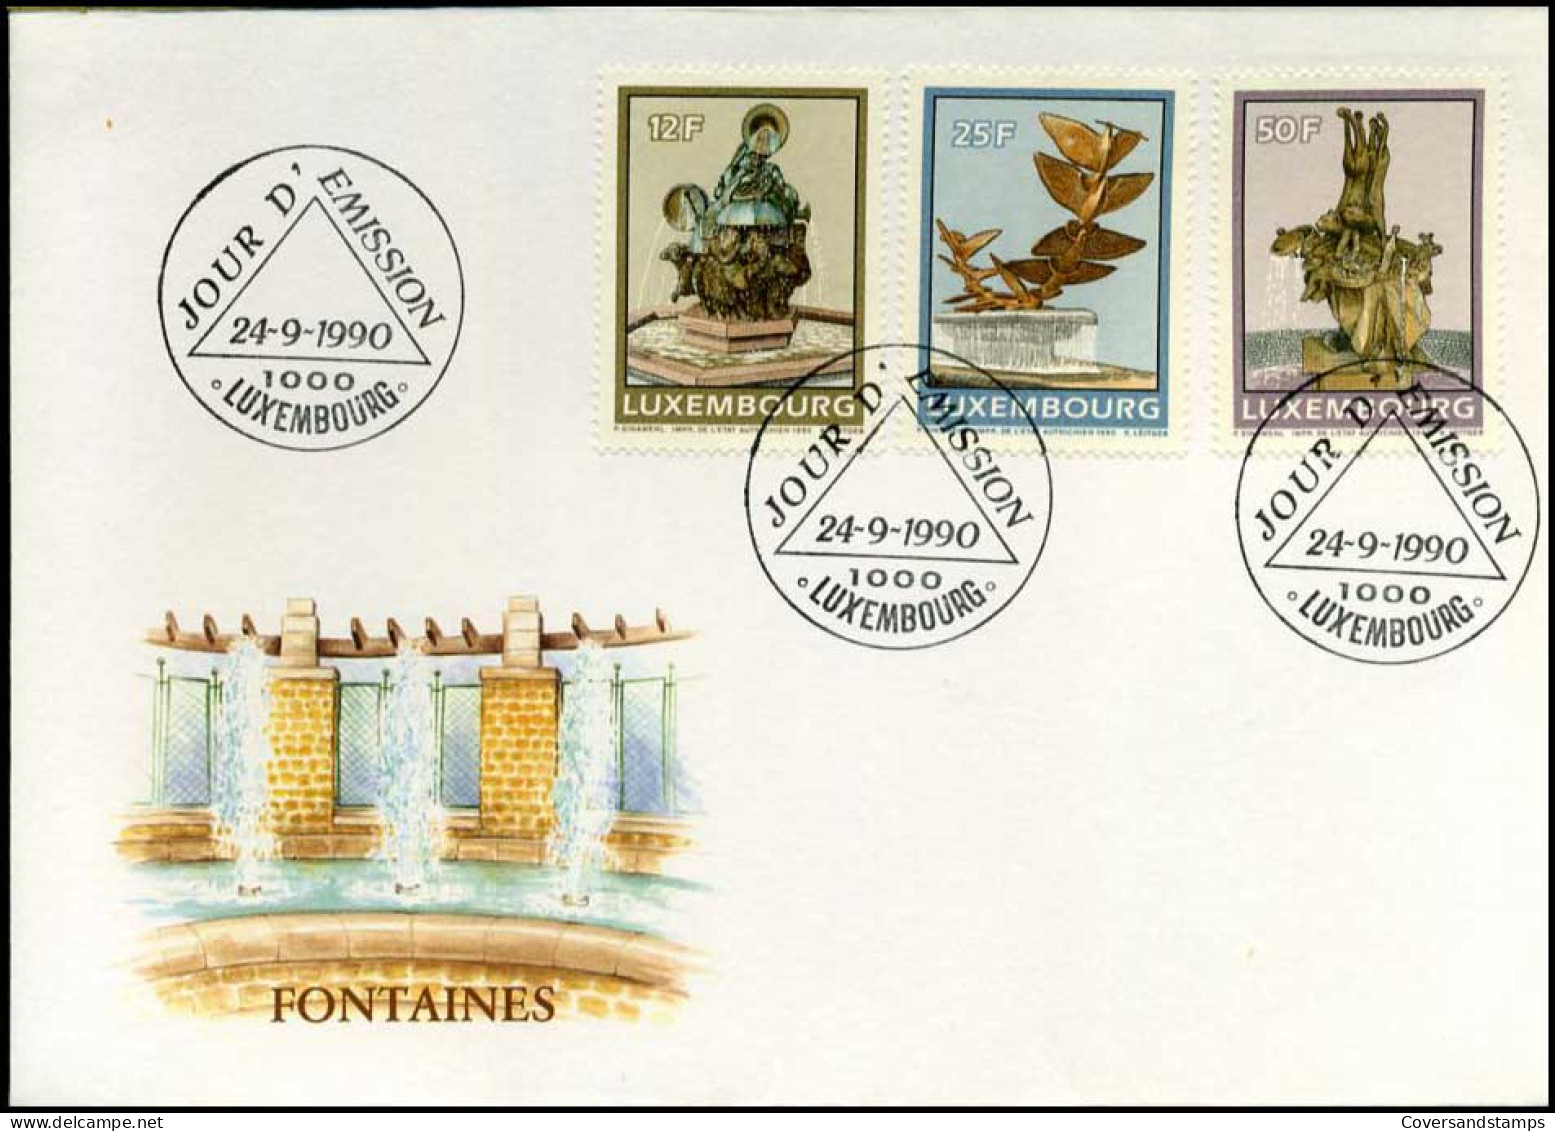 Luxembourg - FDC - Fontaines - FDC